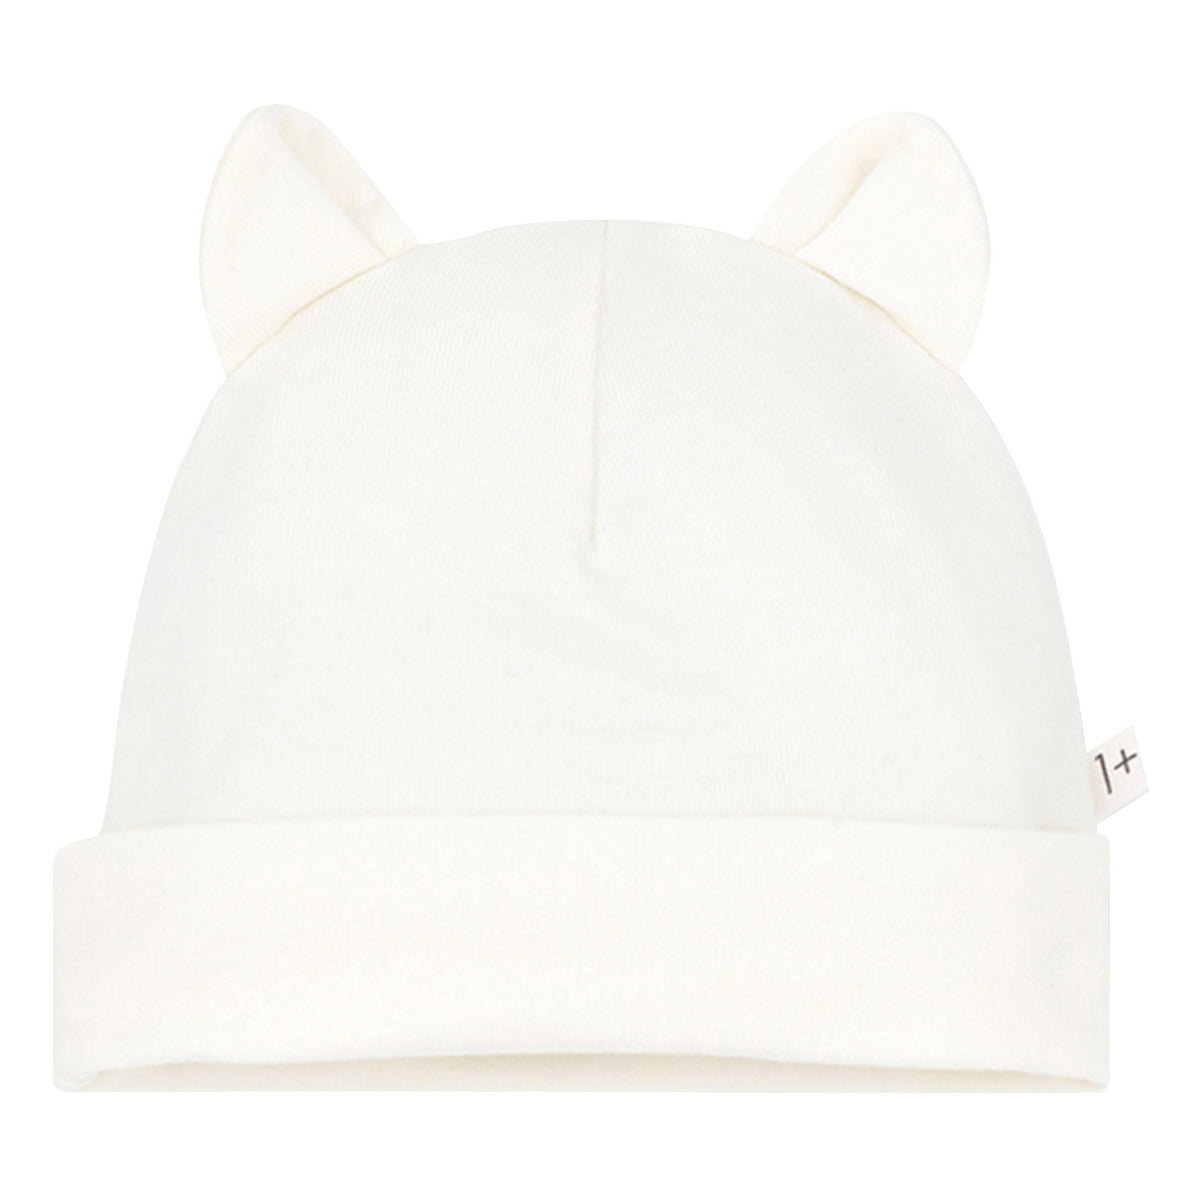 Very cute white beanie with ears for baby